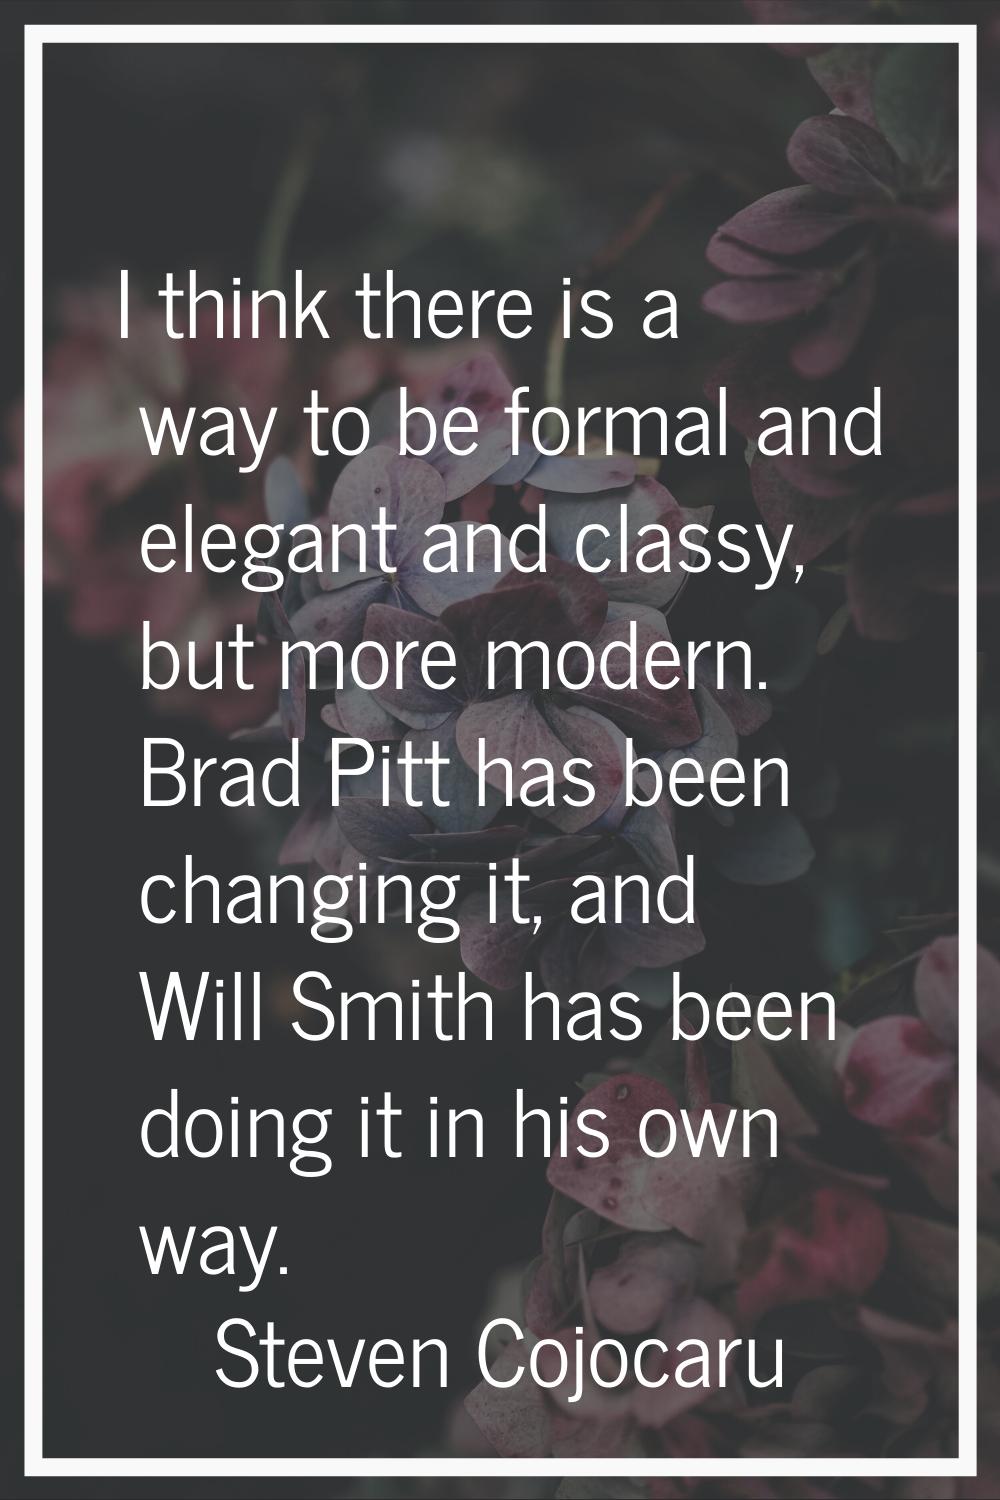 I think there is a way to be formal and elegant and classy, but more modern. Brad Pitt has been cha